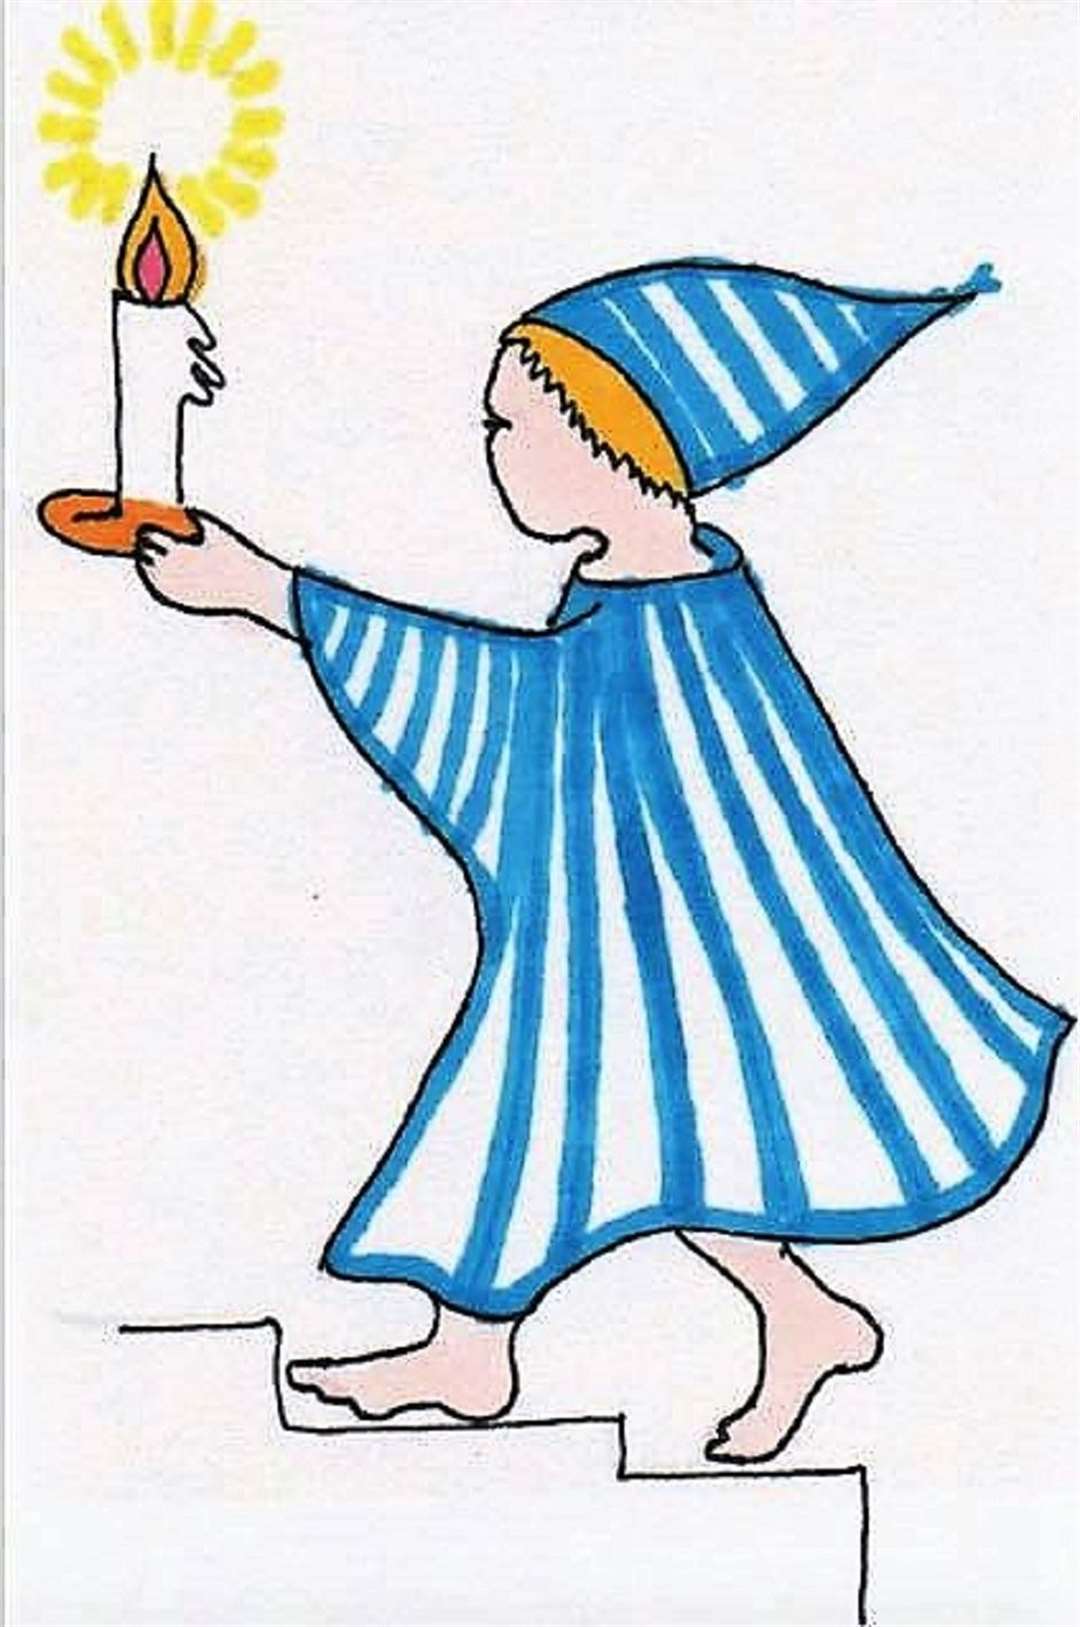 There's a resemblance to Wee Willie Winkie in this illustration by Sue Beardsworth.